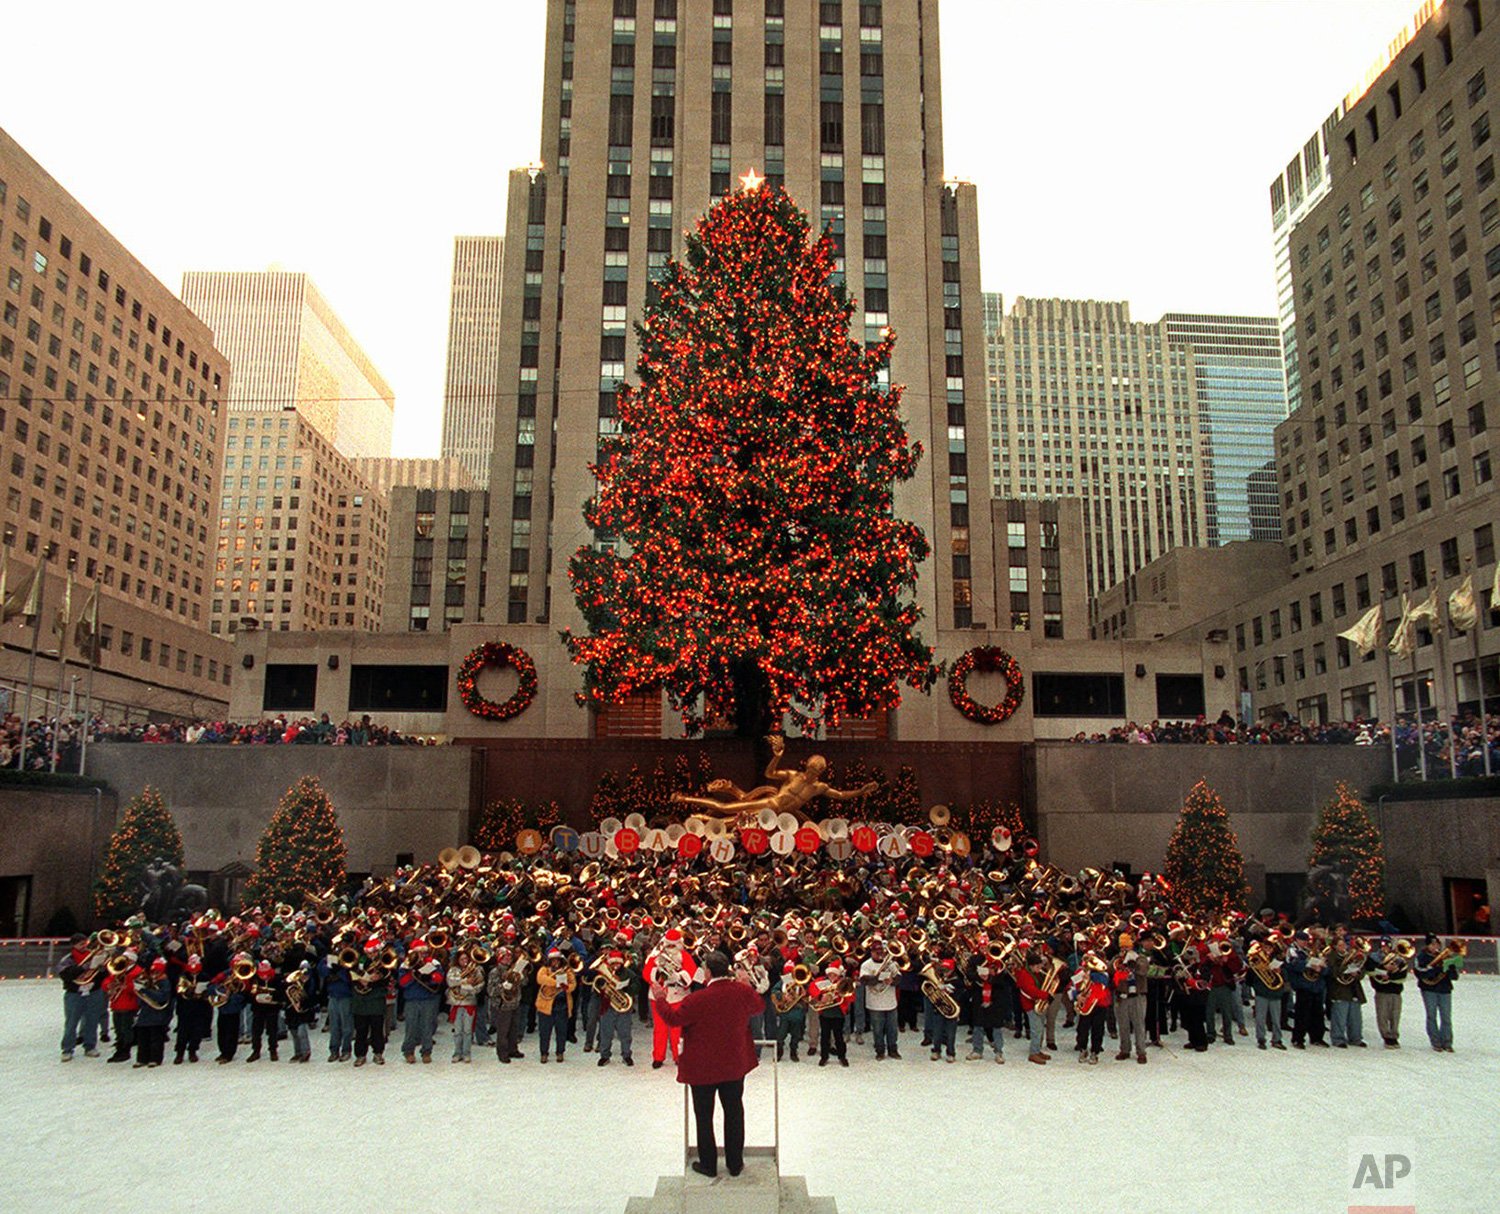  Some of the more than 500 tuba players participating in the 24th Annual Tuba Christmas play during a concert on the ice at Rockefeller Center's skating rink below a 74-foot Norway spruce  Sunday, Dec. 14, 1997, in New York. (AP Photo/Adam Nadel) 